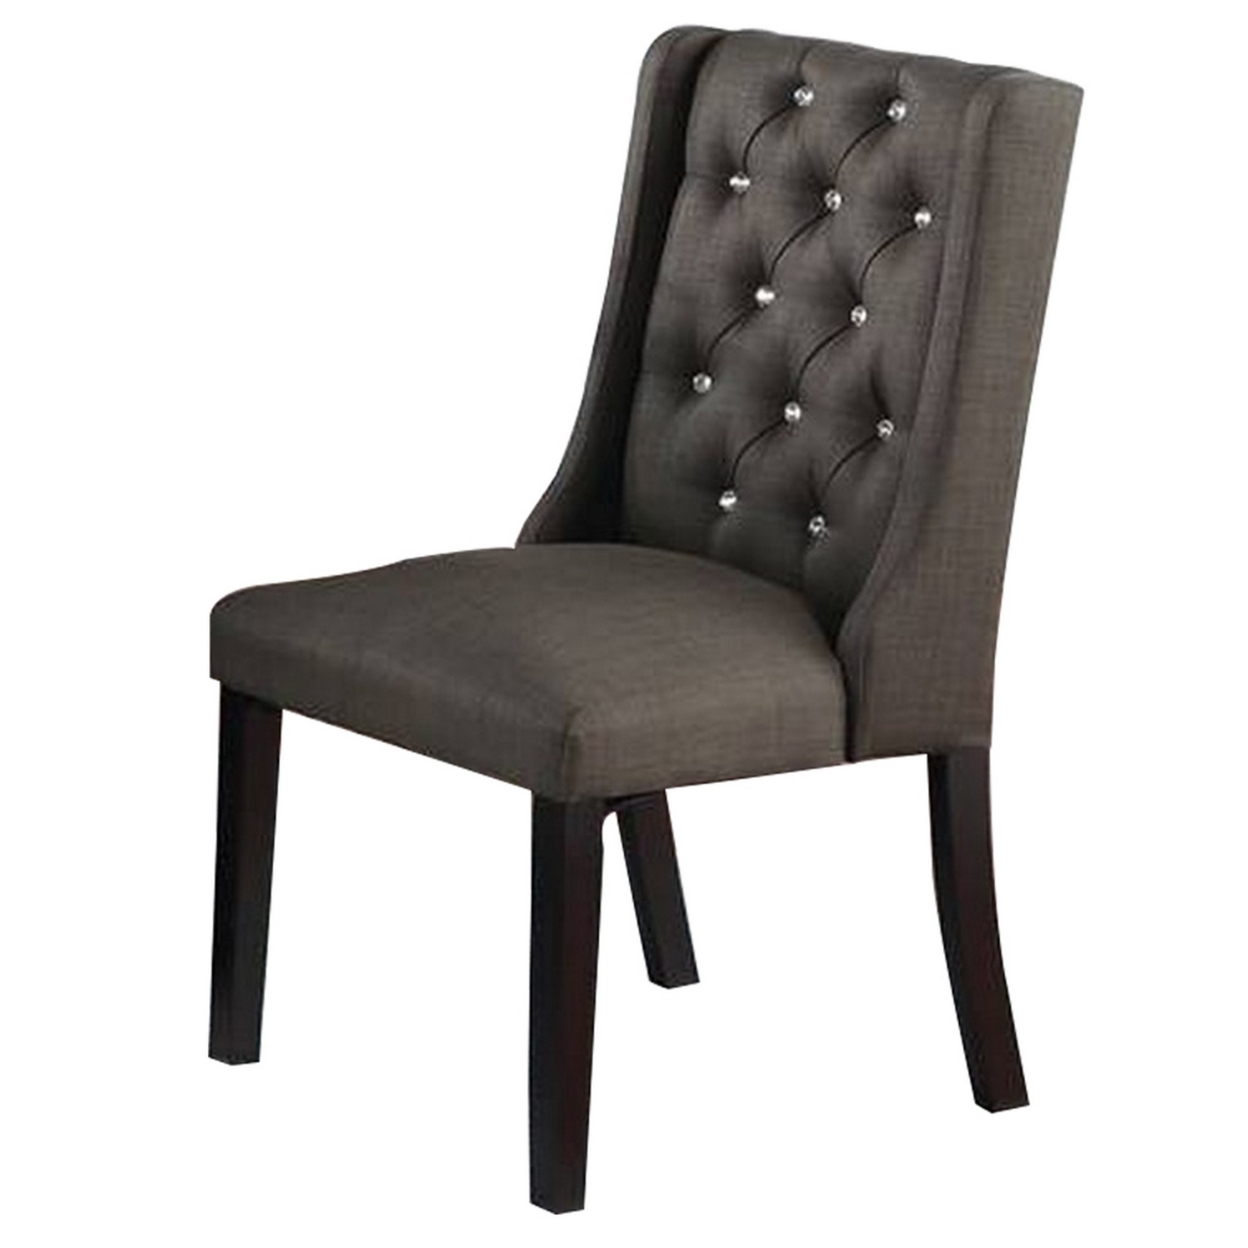 25 Inch Wood Dining Chair, Set Of 2, Button Tufted Wingback Design, Black